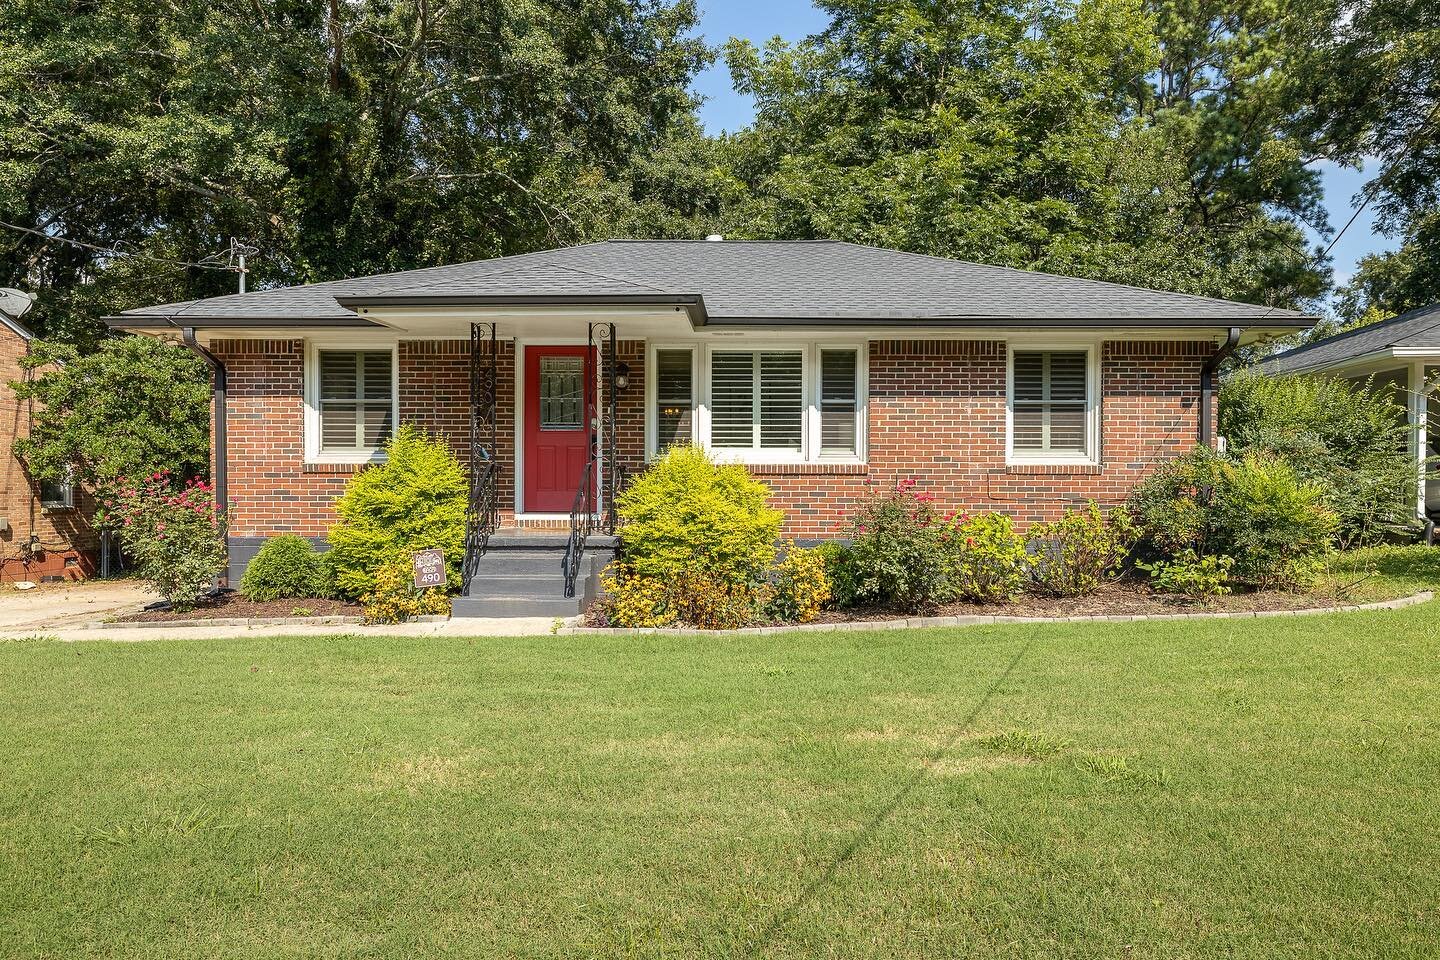 Just listed in EAV! This 3br, 1ba renovated ranch is conveniently located close to the village, with easy access to the interstate. Contact @kjatlanta or @champxatlanta for more info. Staging by @endvisionatlanta and photos by @stabler